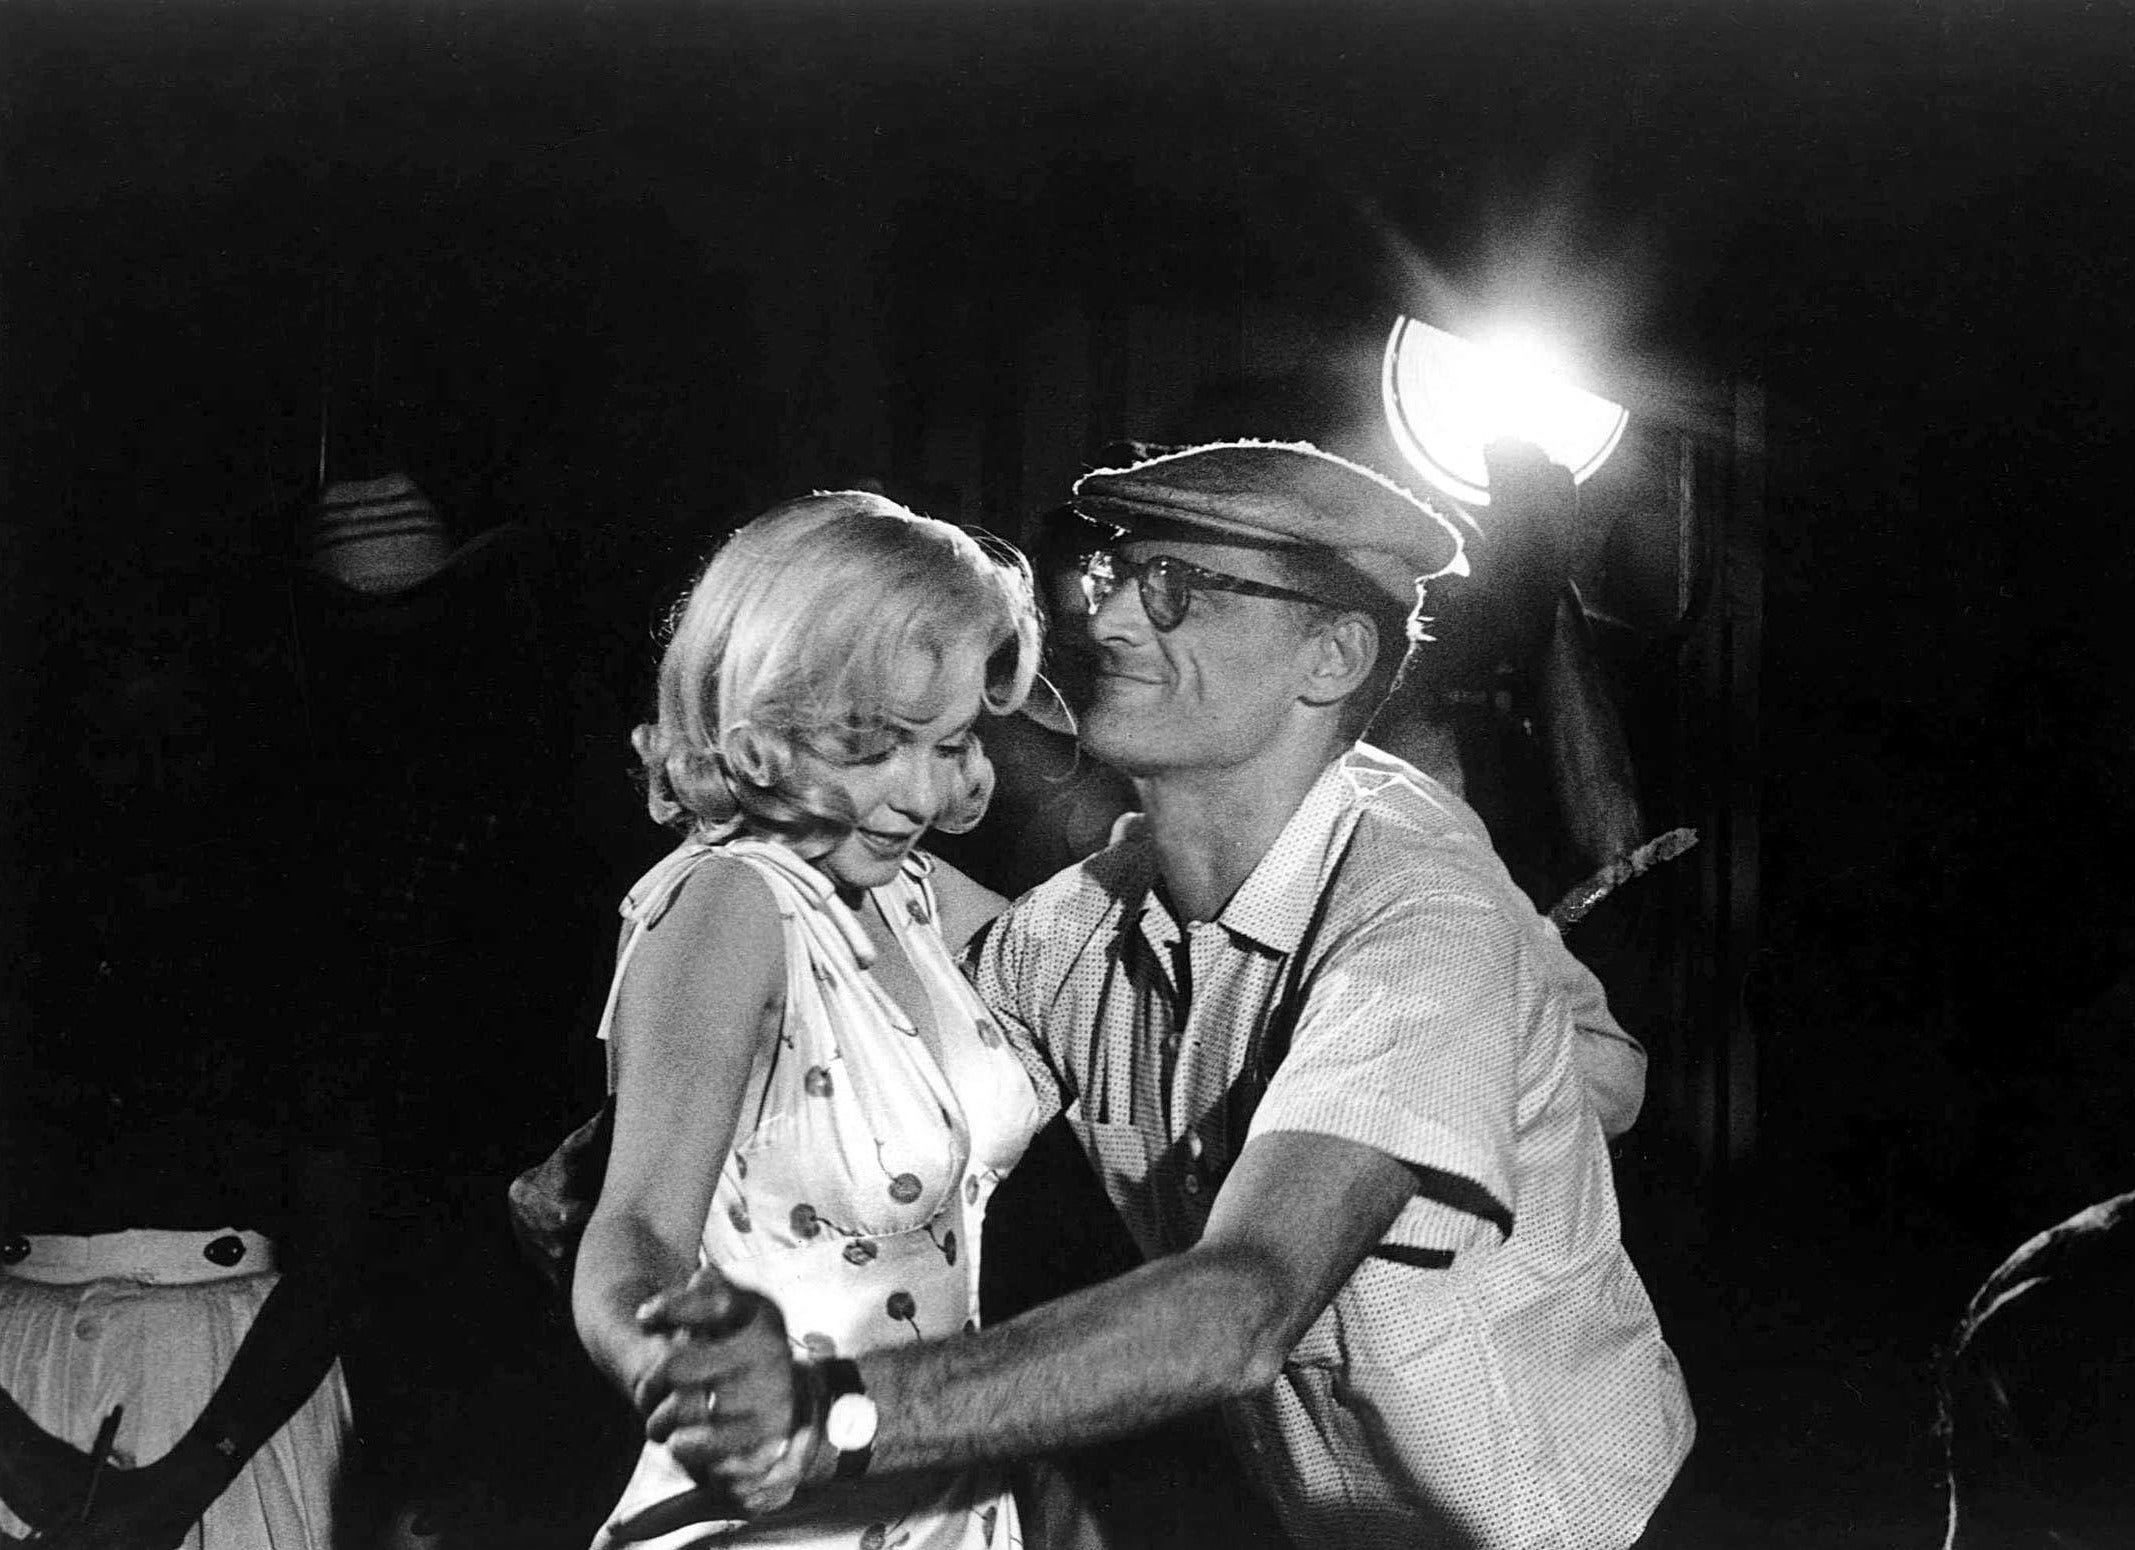 Arthur Miller and Marilyn Monroe on the set of ‘The Misfits’ in 1961